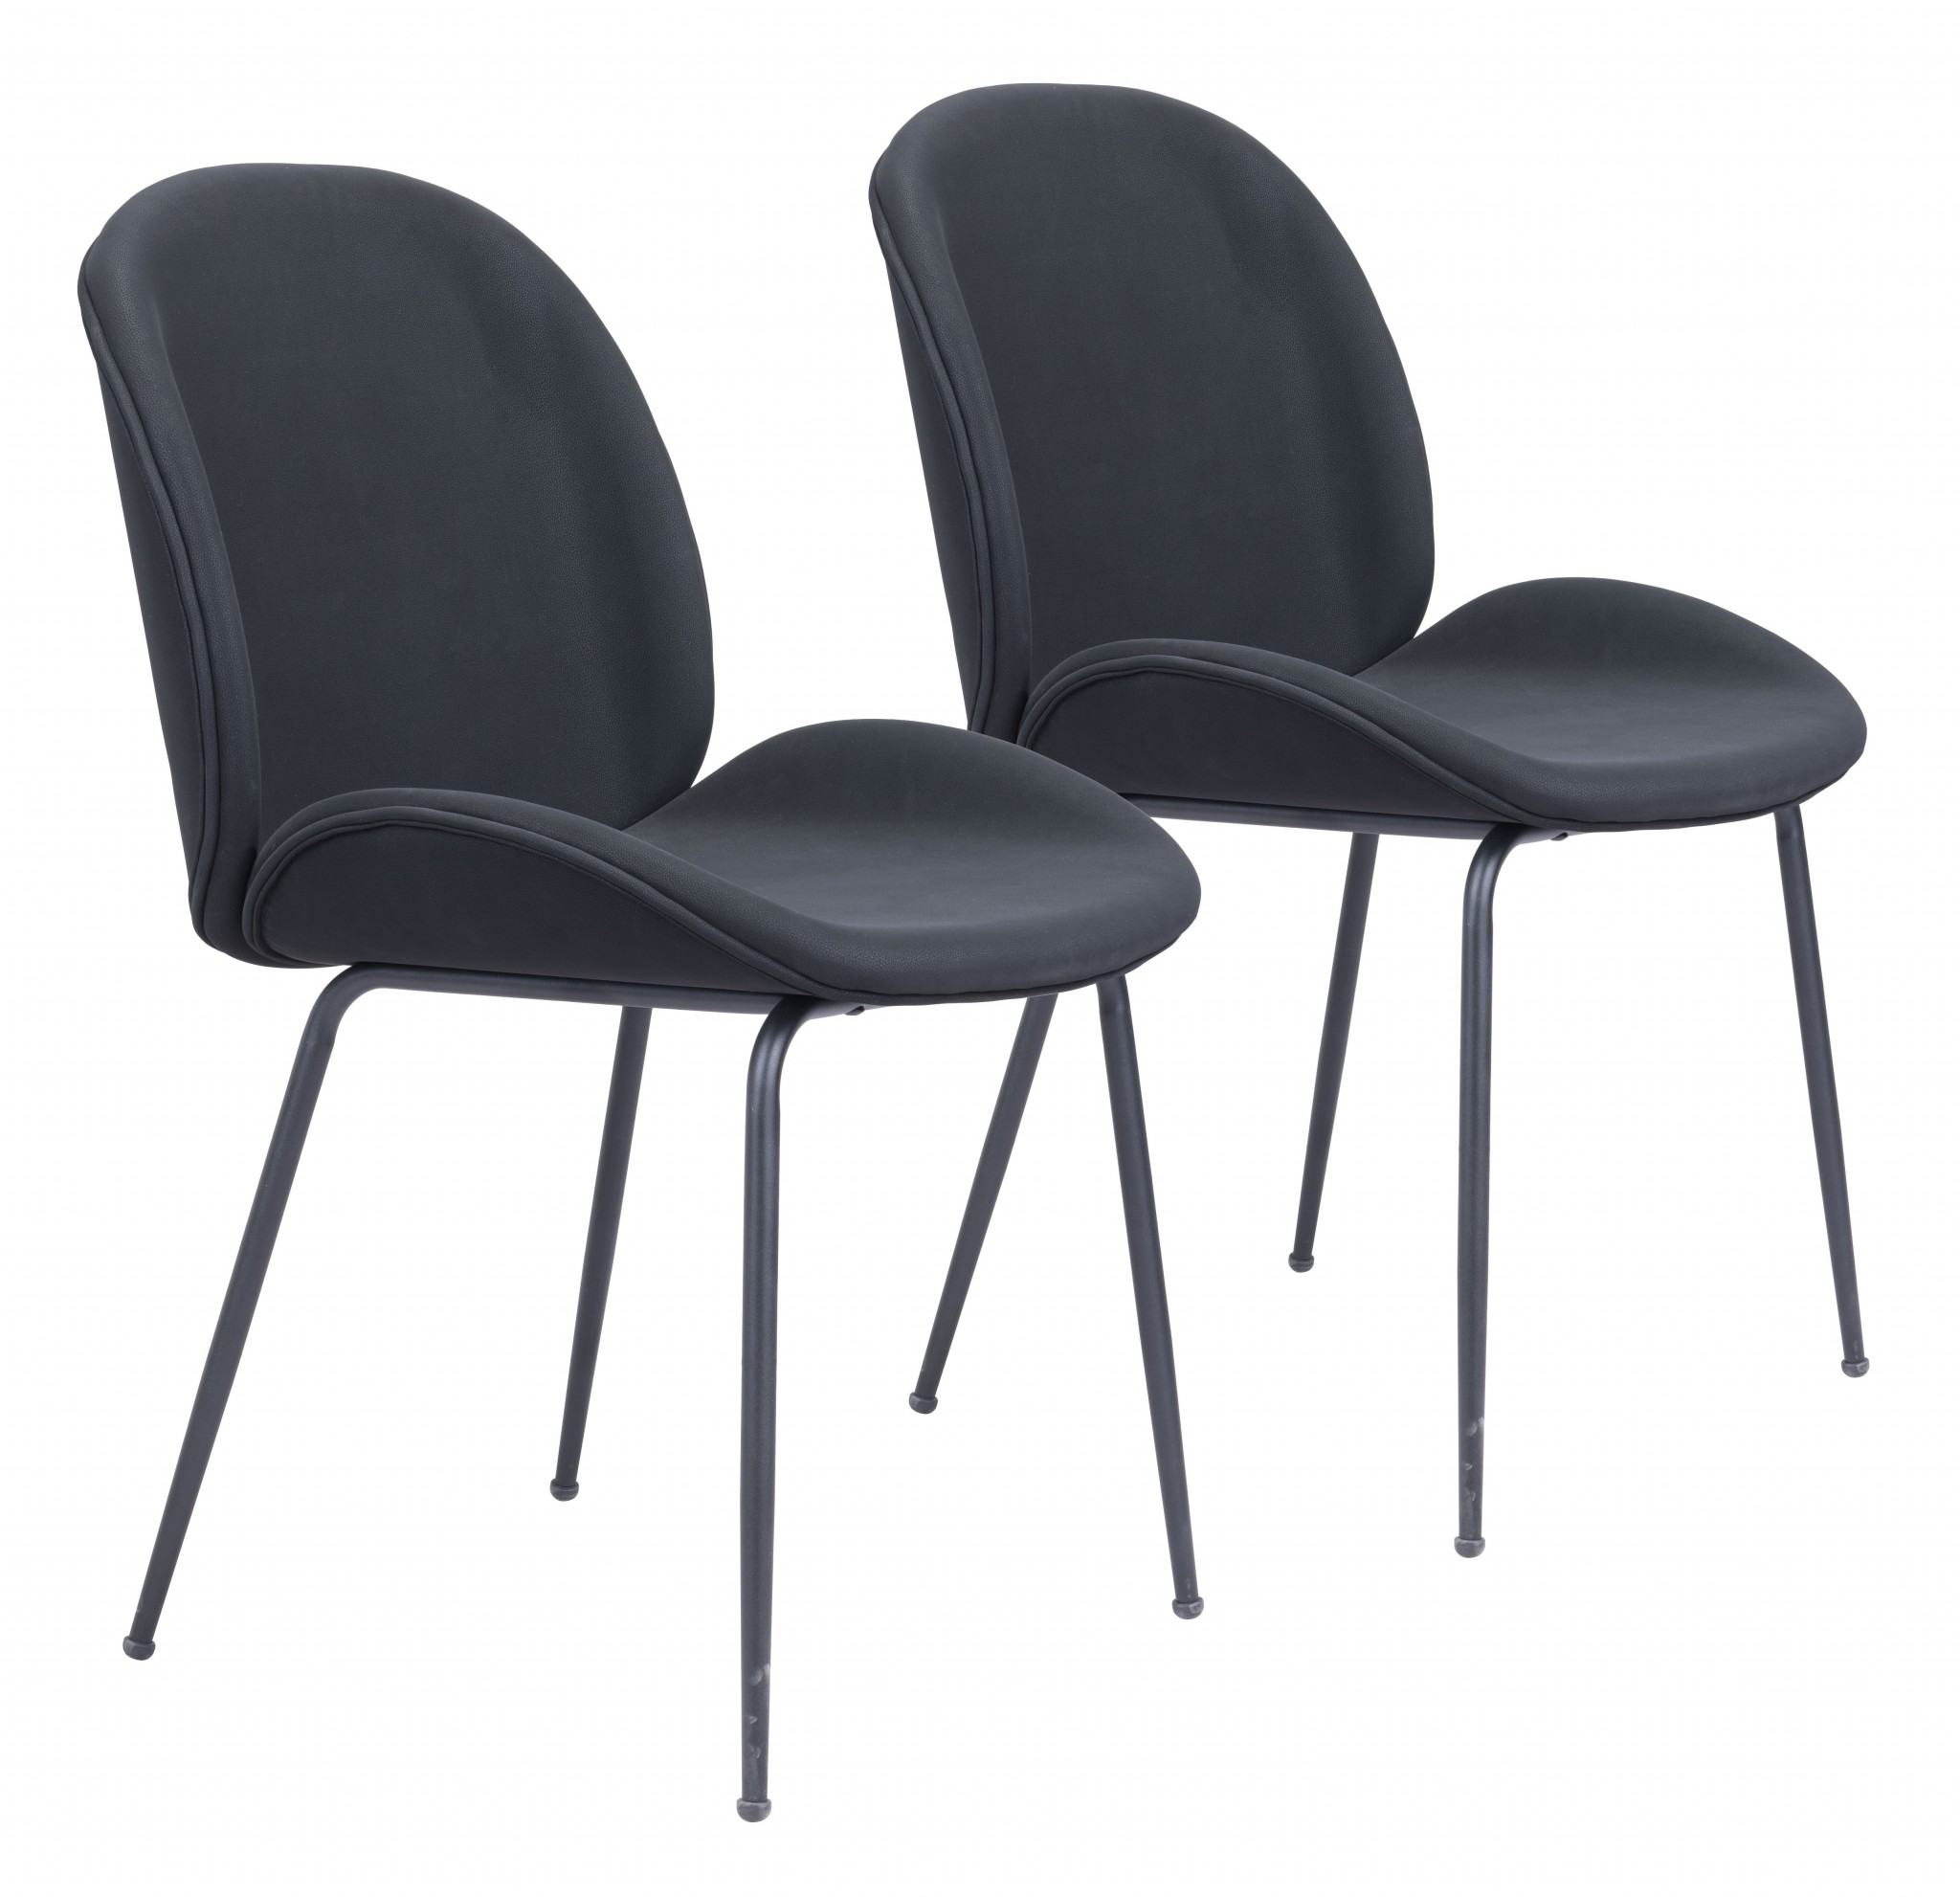 Set of Two Set of Two Contempo Black Velvet Dining Chairs